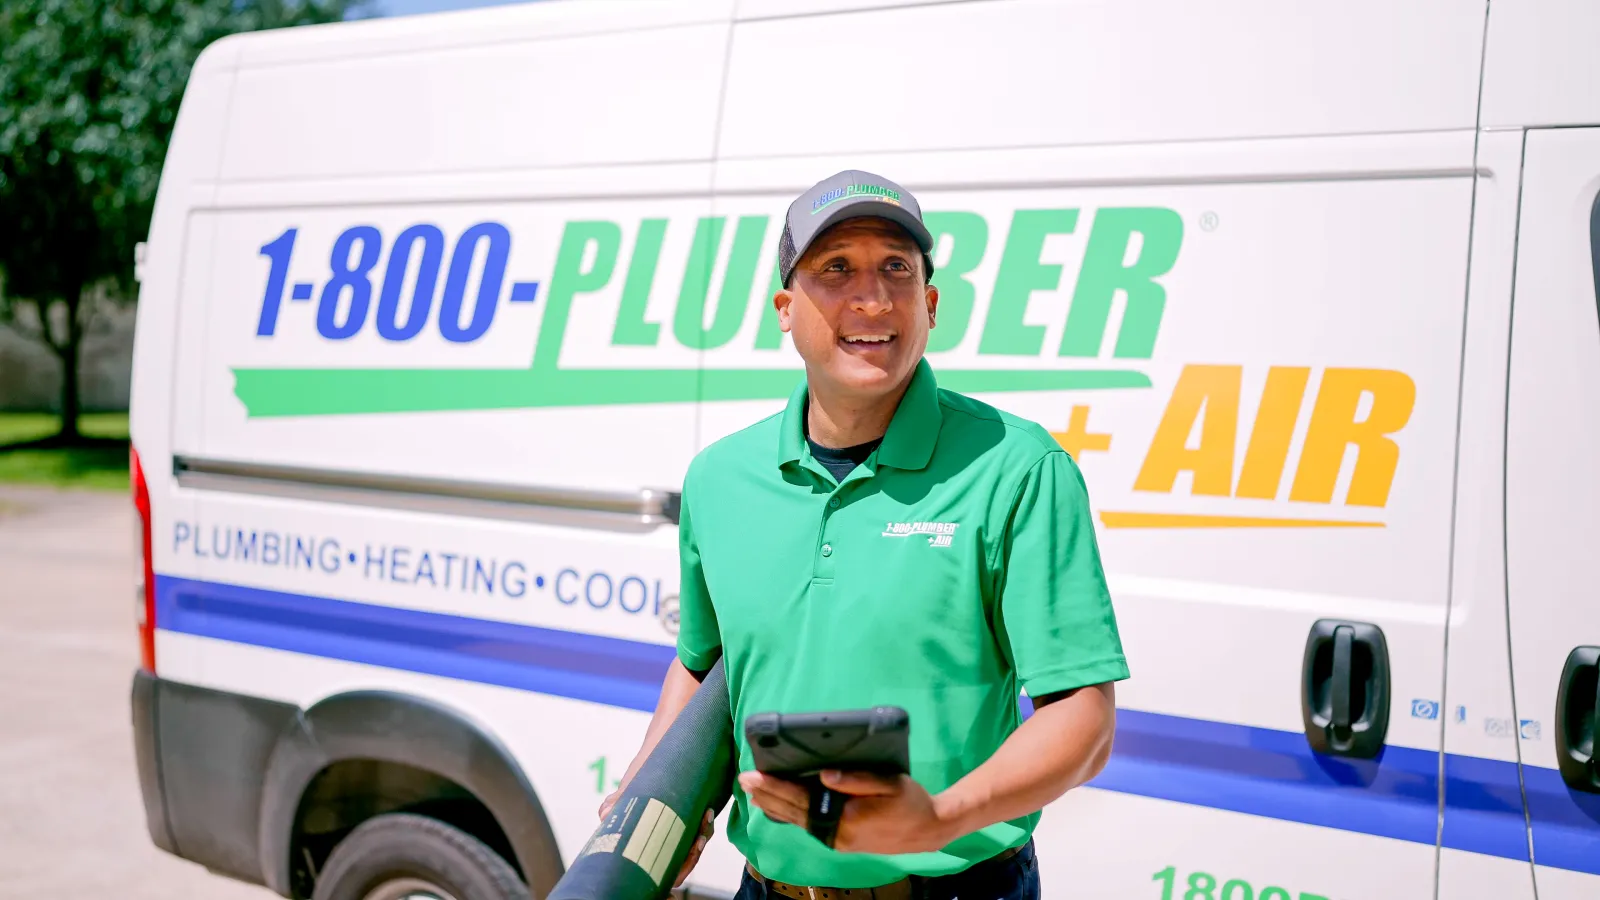 A 1-800-Plumber +Air of Clearwater technician with a van